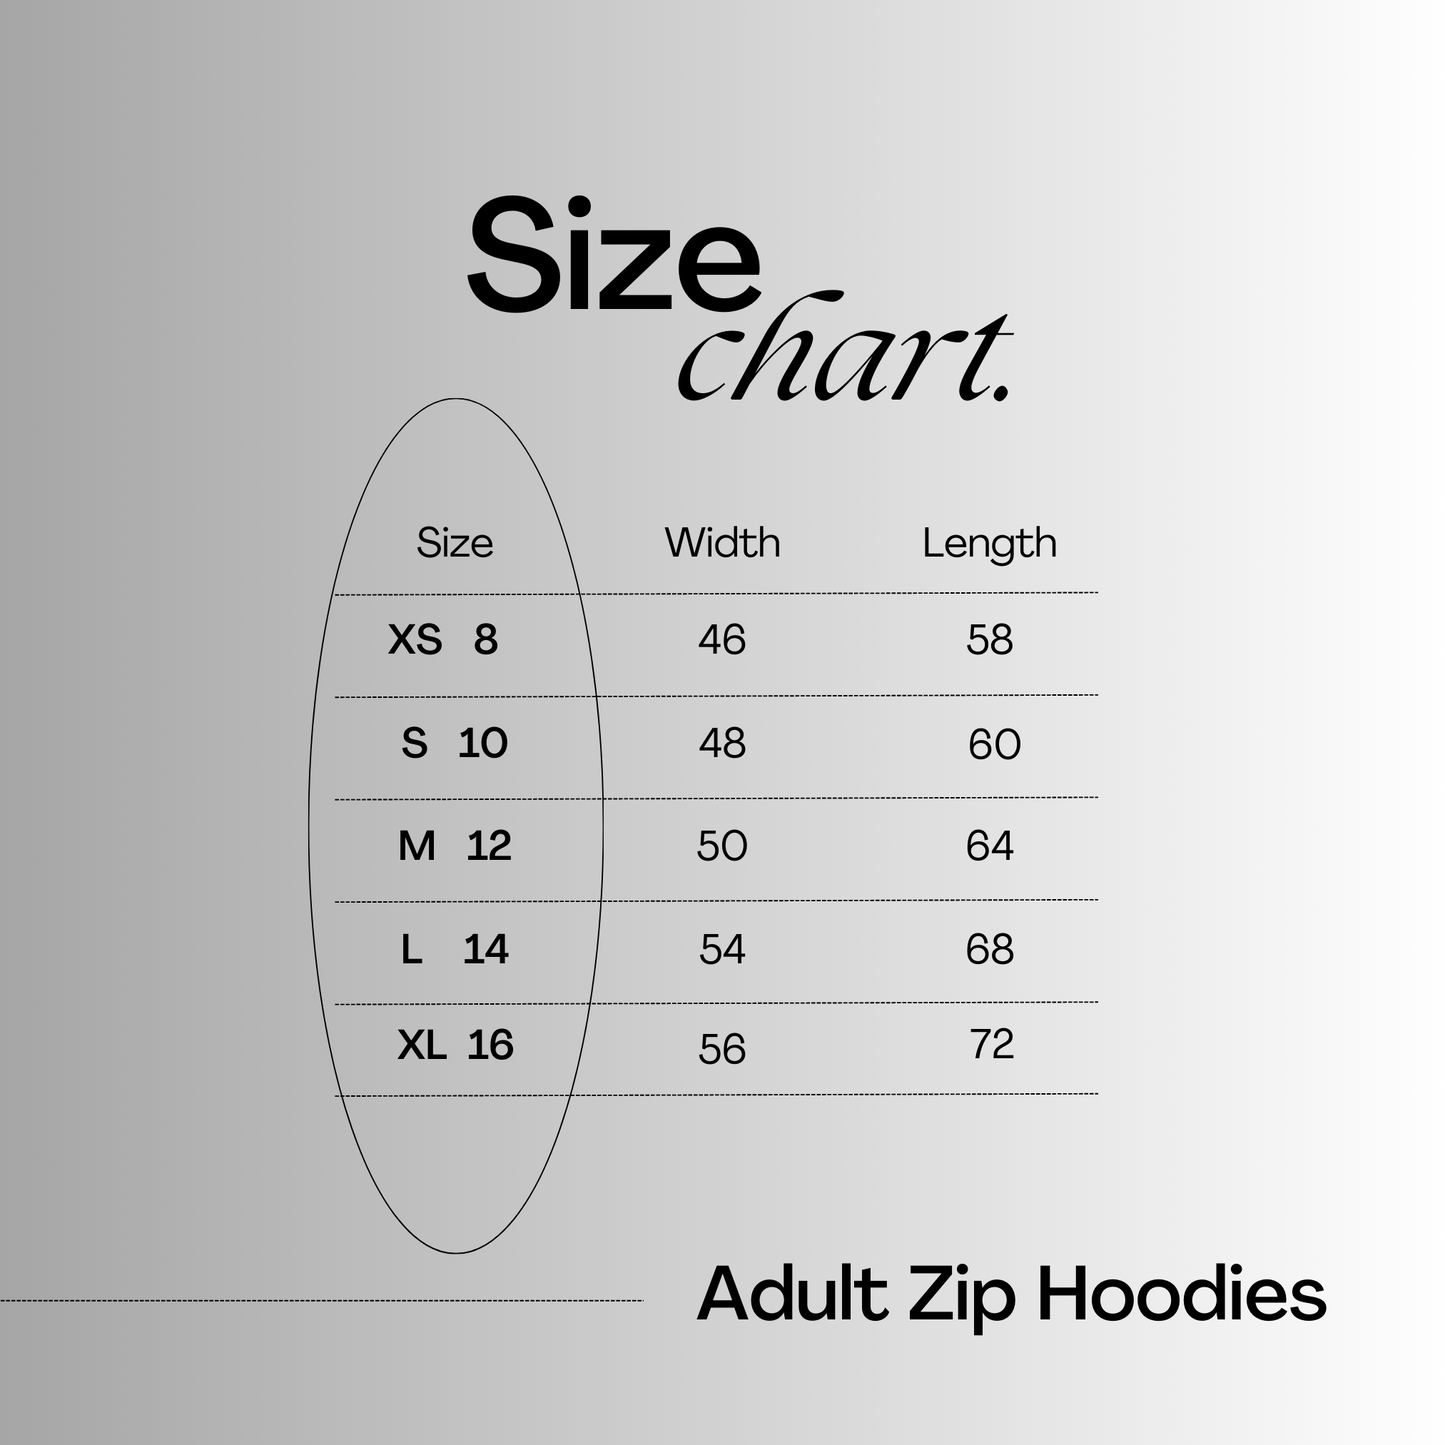 Six the musical cotton Queen crown design Zipped Adult Hoodie